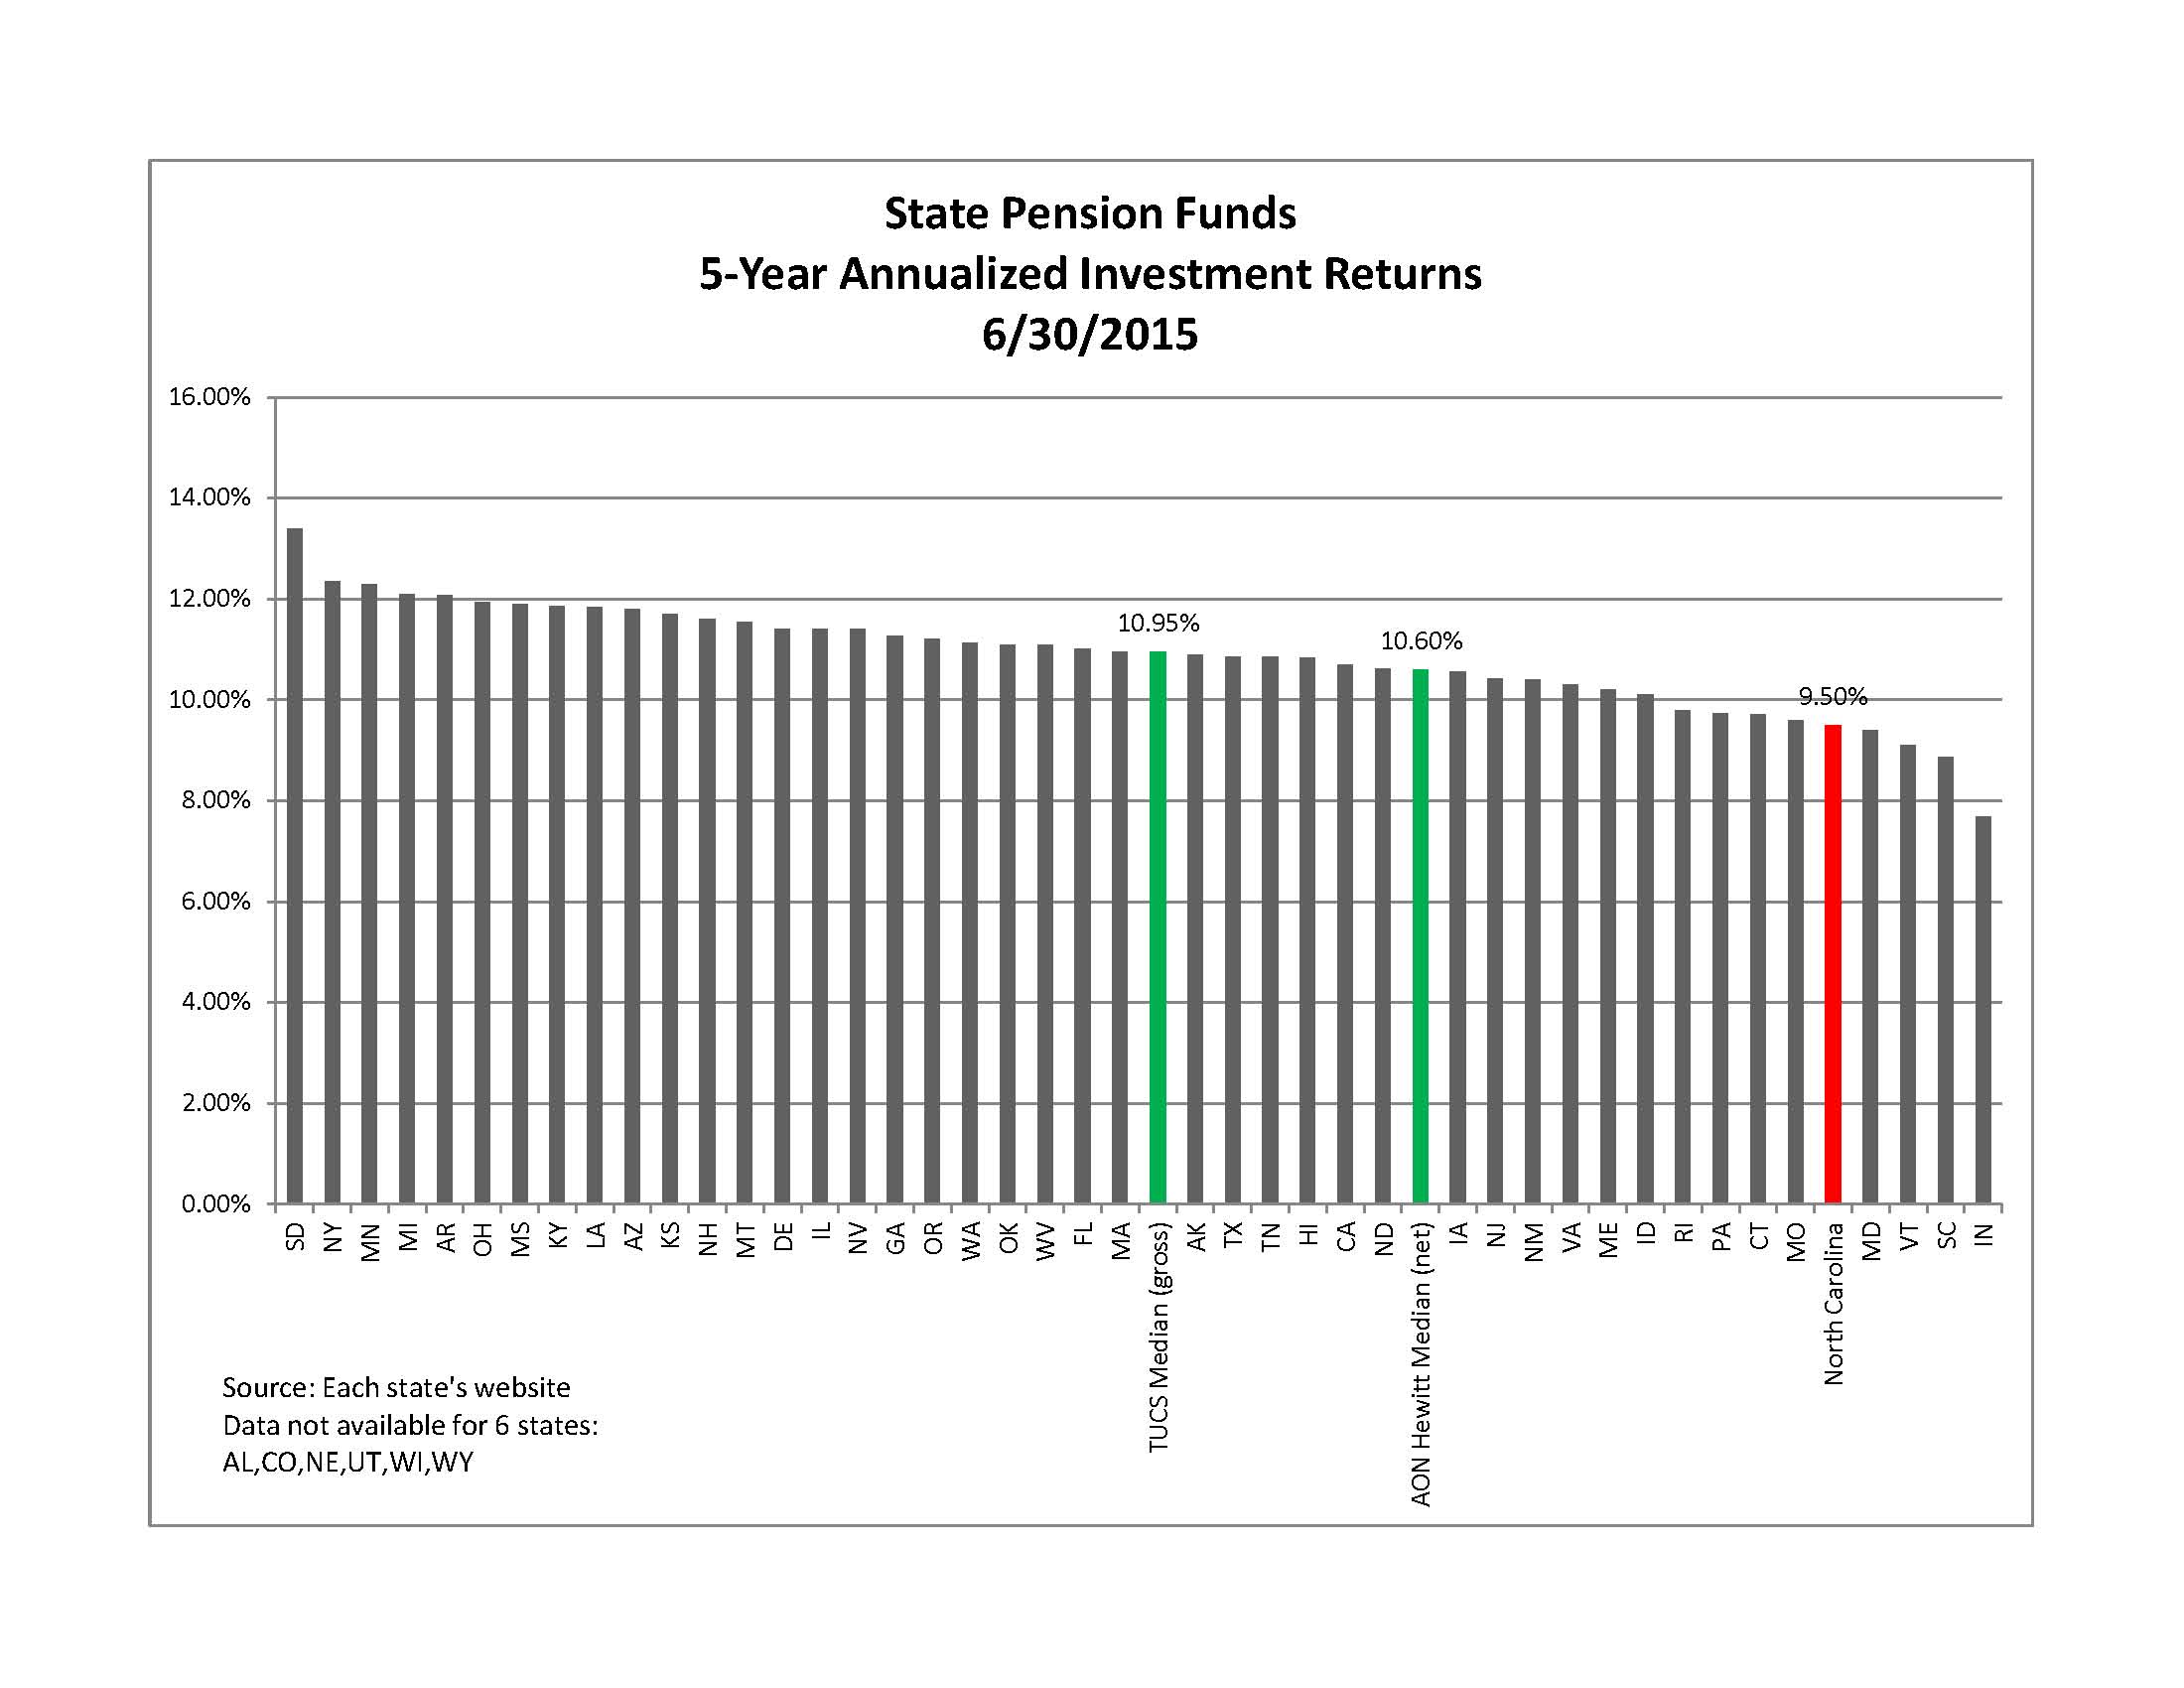 State pension fund returns over a five-year period (Chart data provided by Ron Elmer)